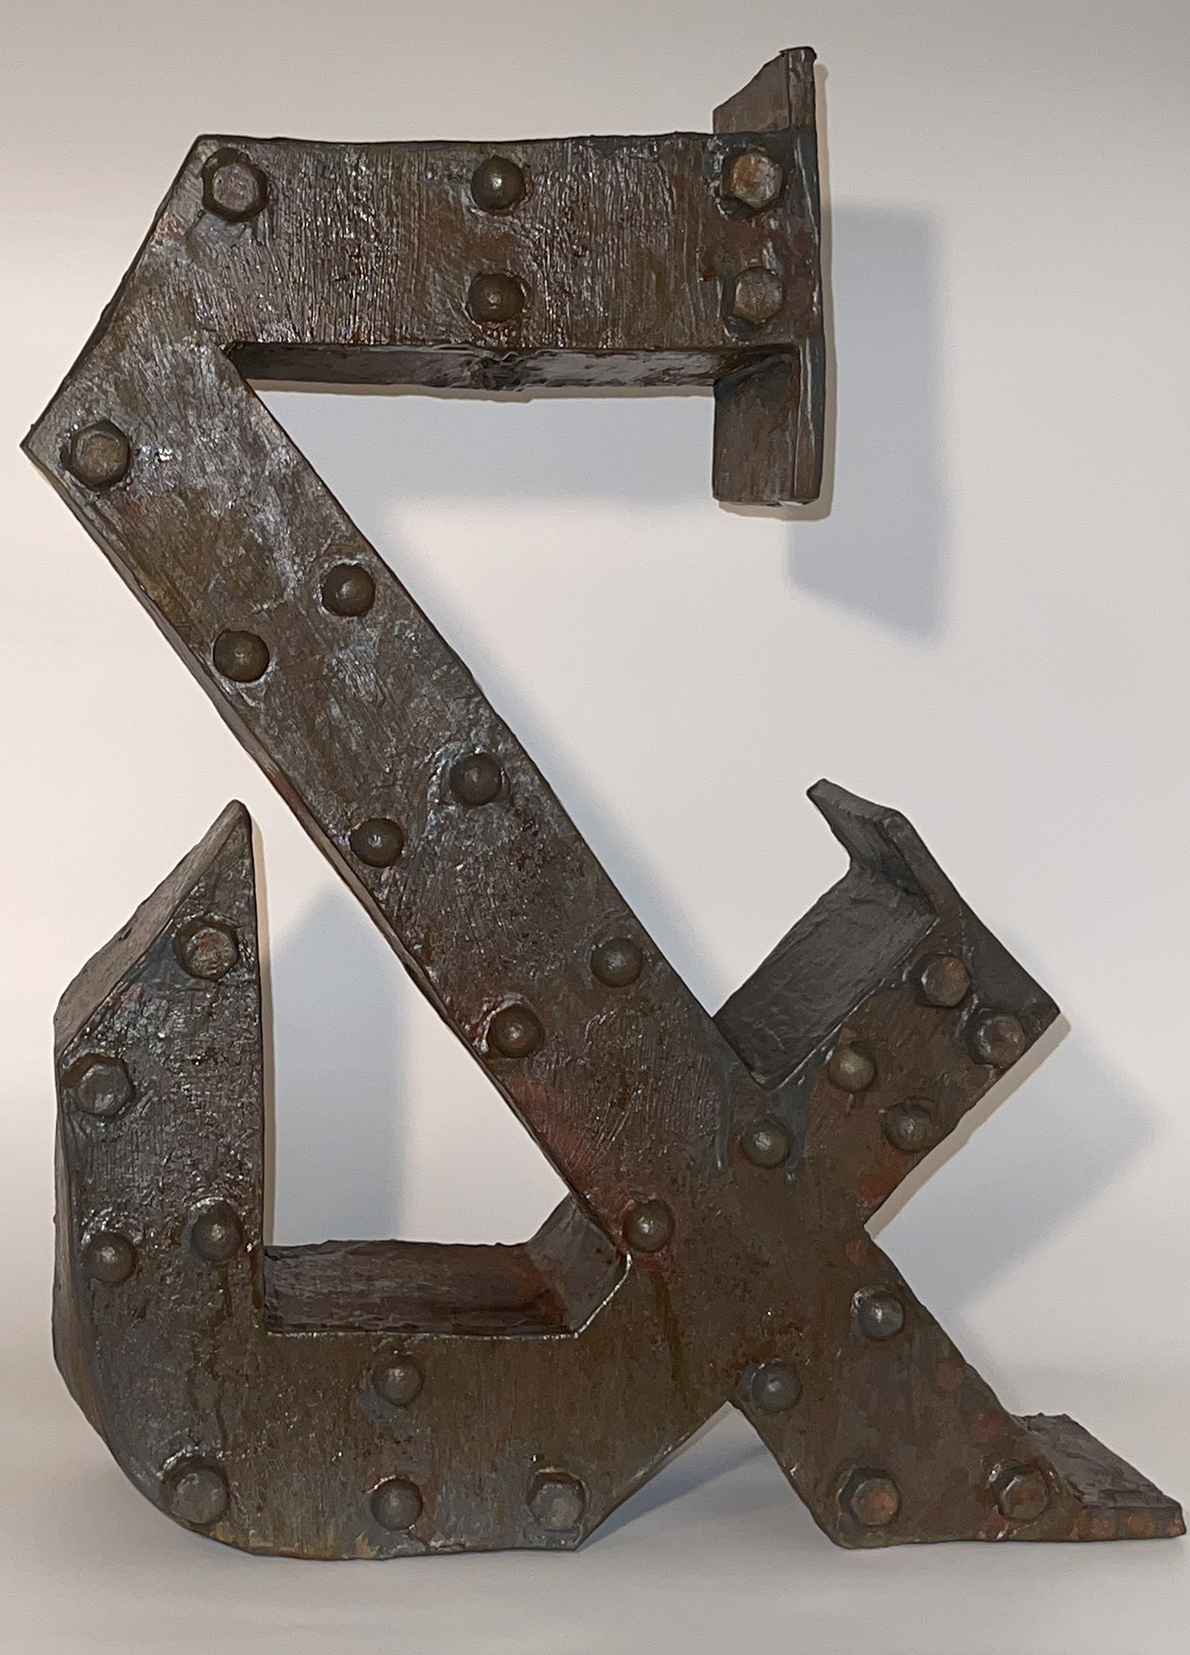 sculpture of an & sign. It is a dark brown color and looks very industrial. It has belts and knobs on it.